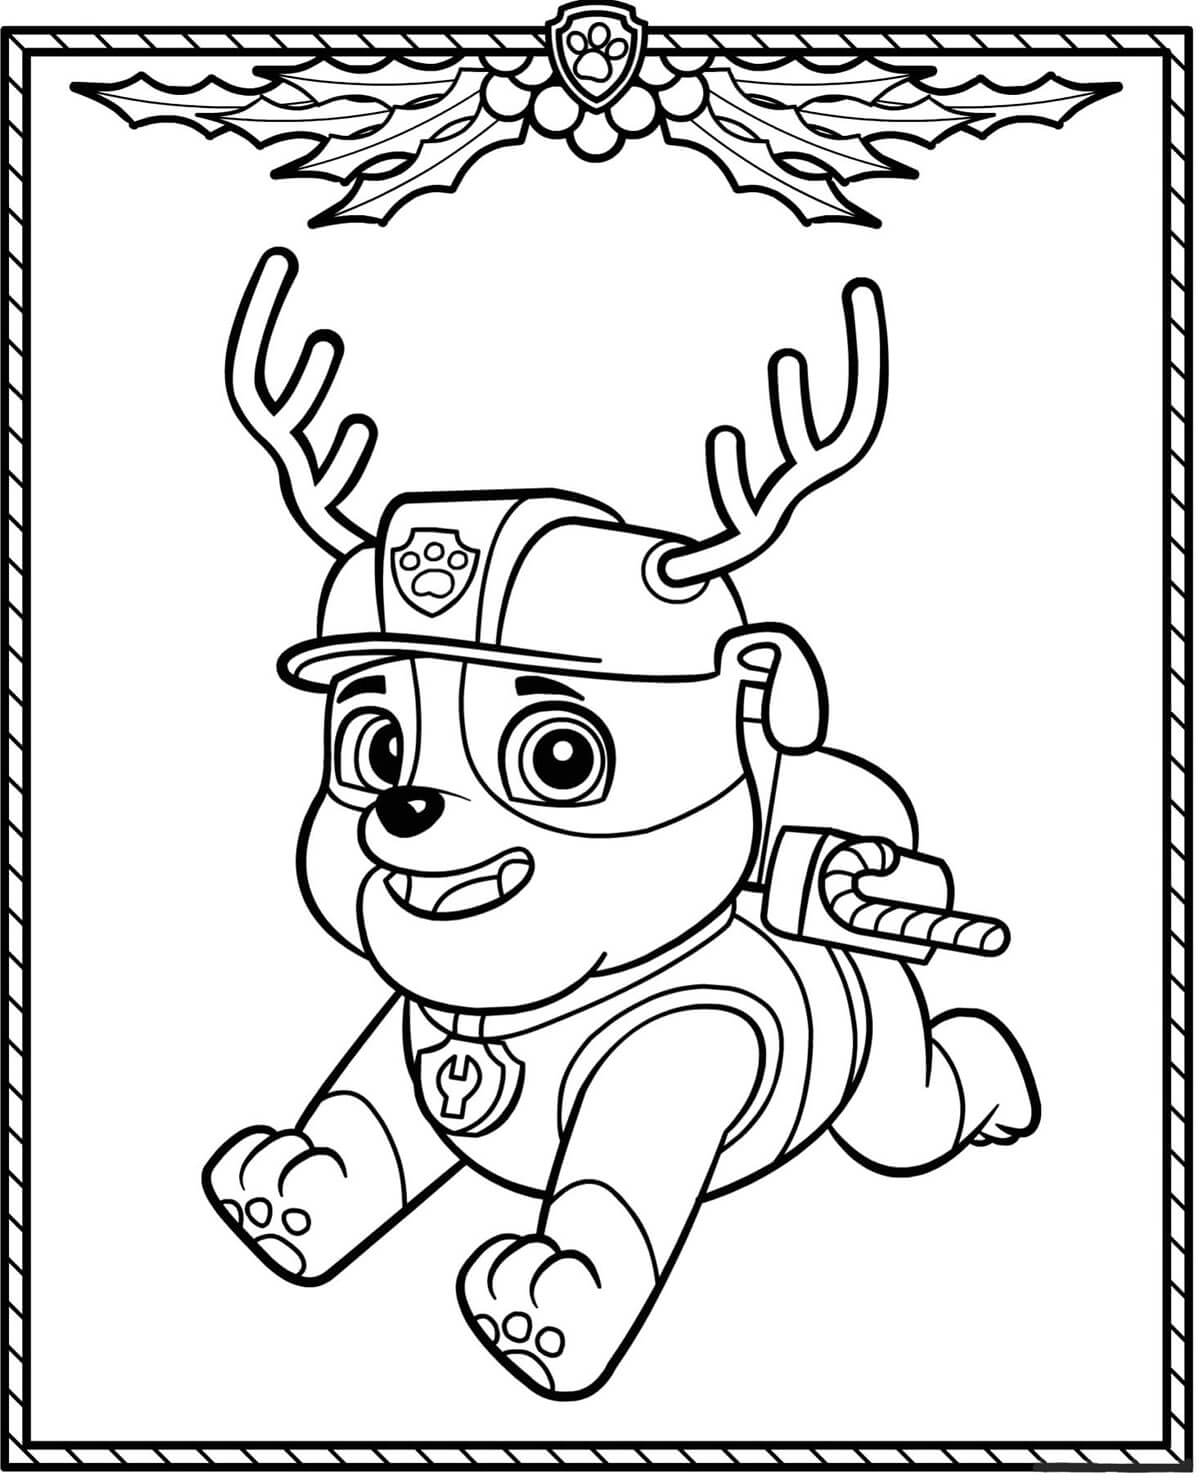 Printable Christmas Coloring Pages Free_51392